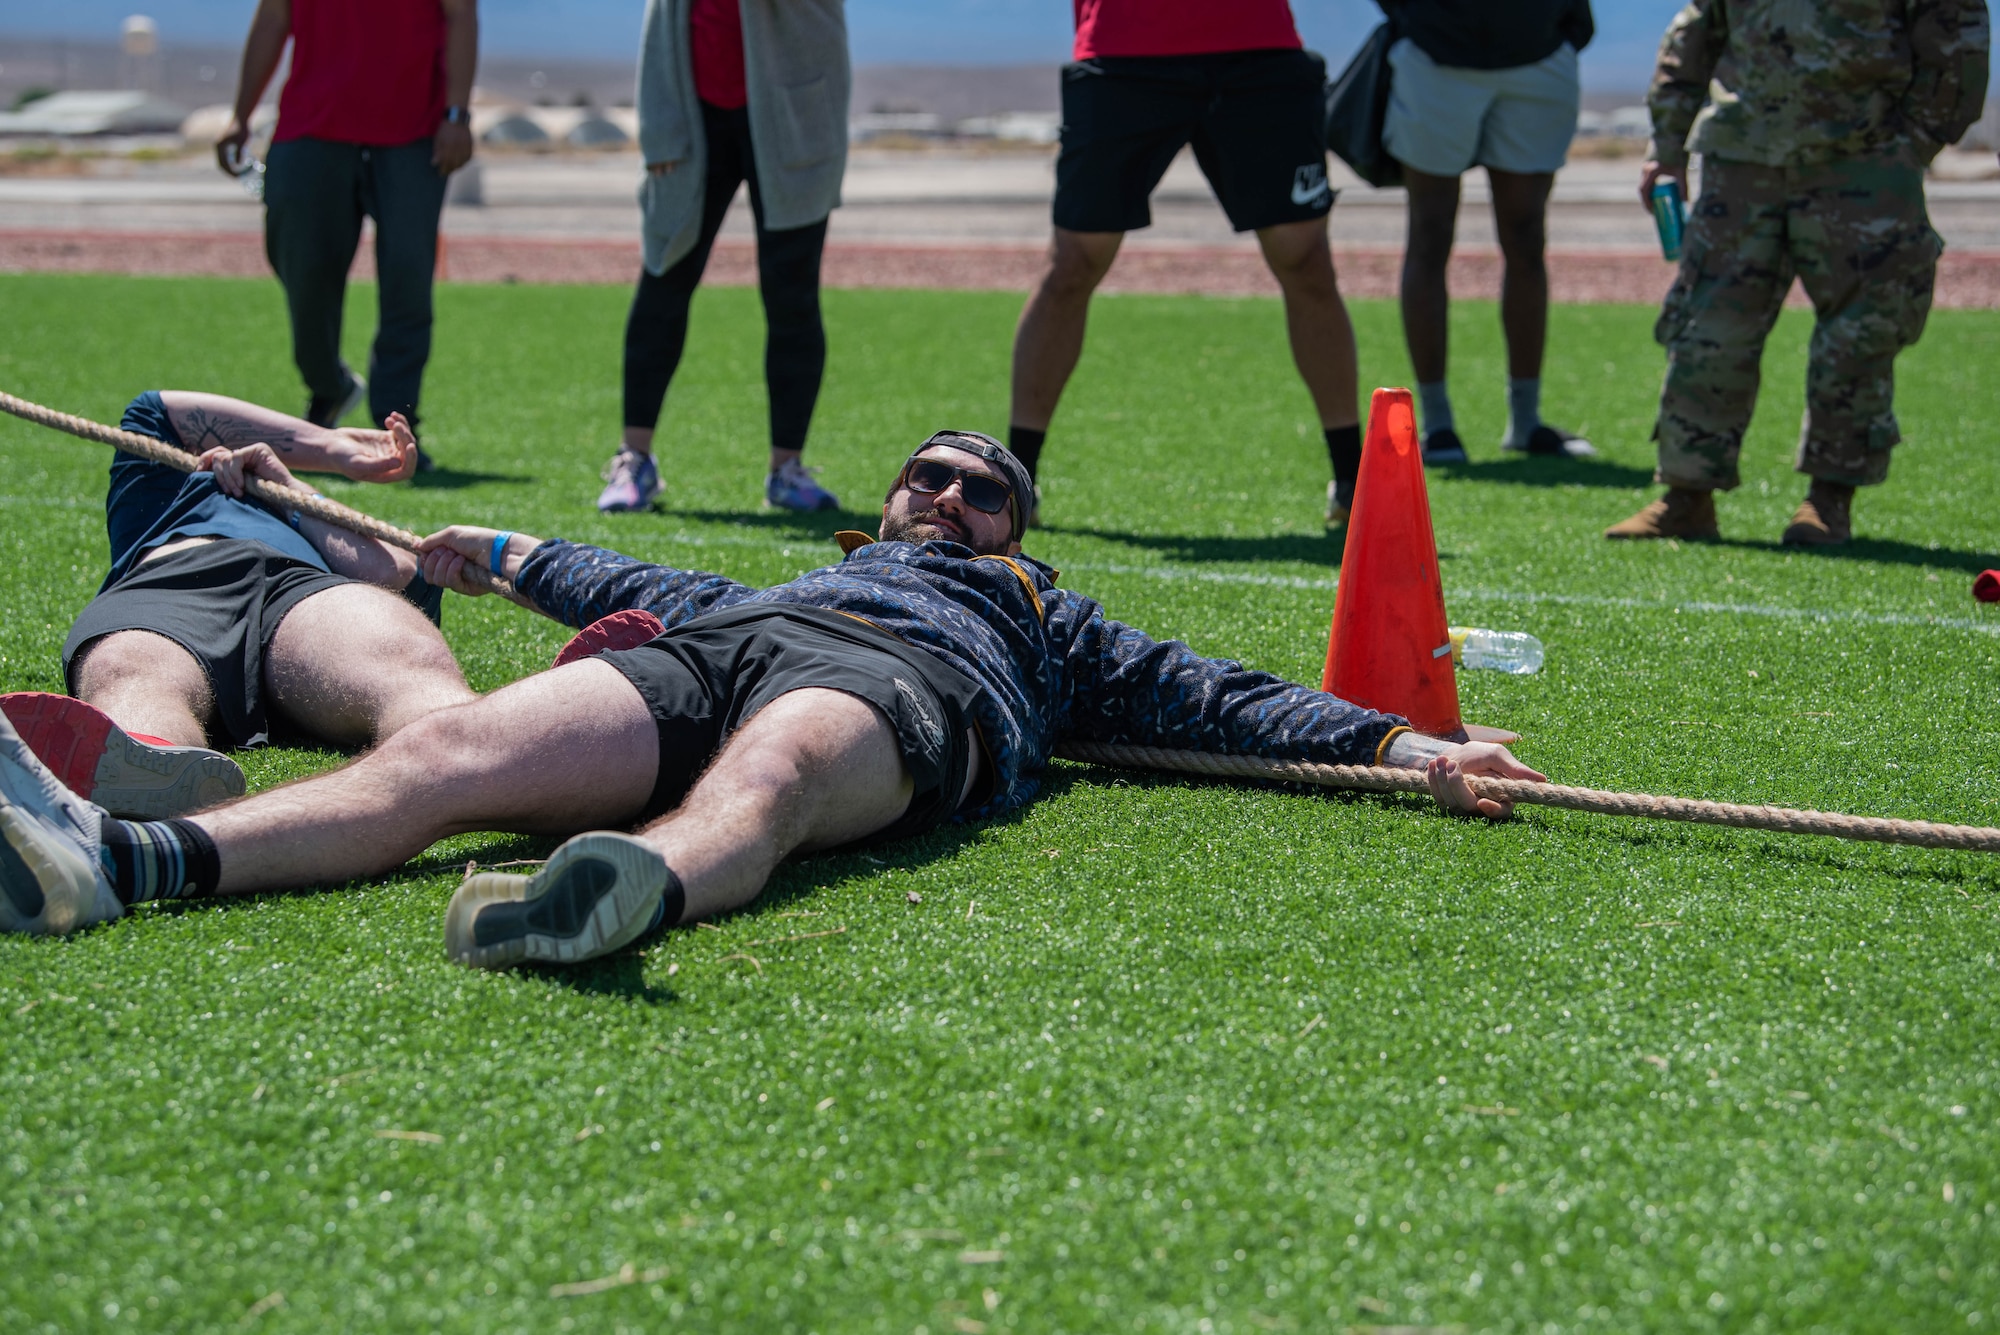 An airman lays on a turf field after falling to the ground during a tug of war match.